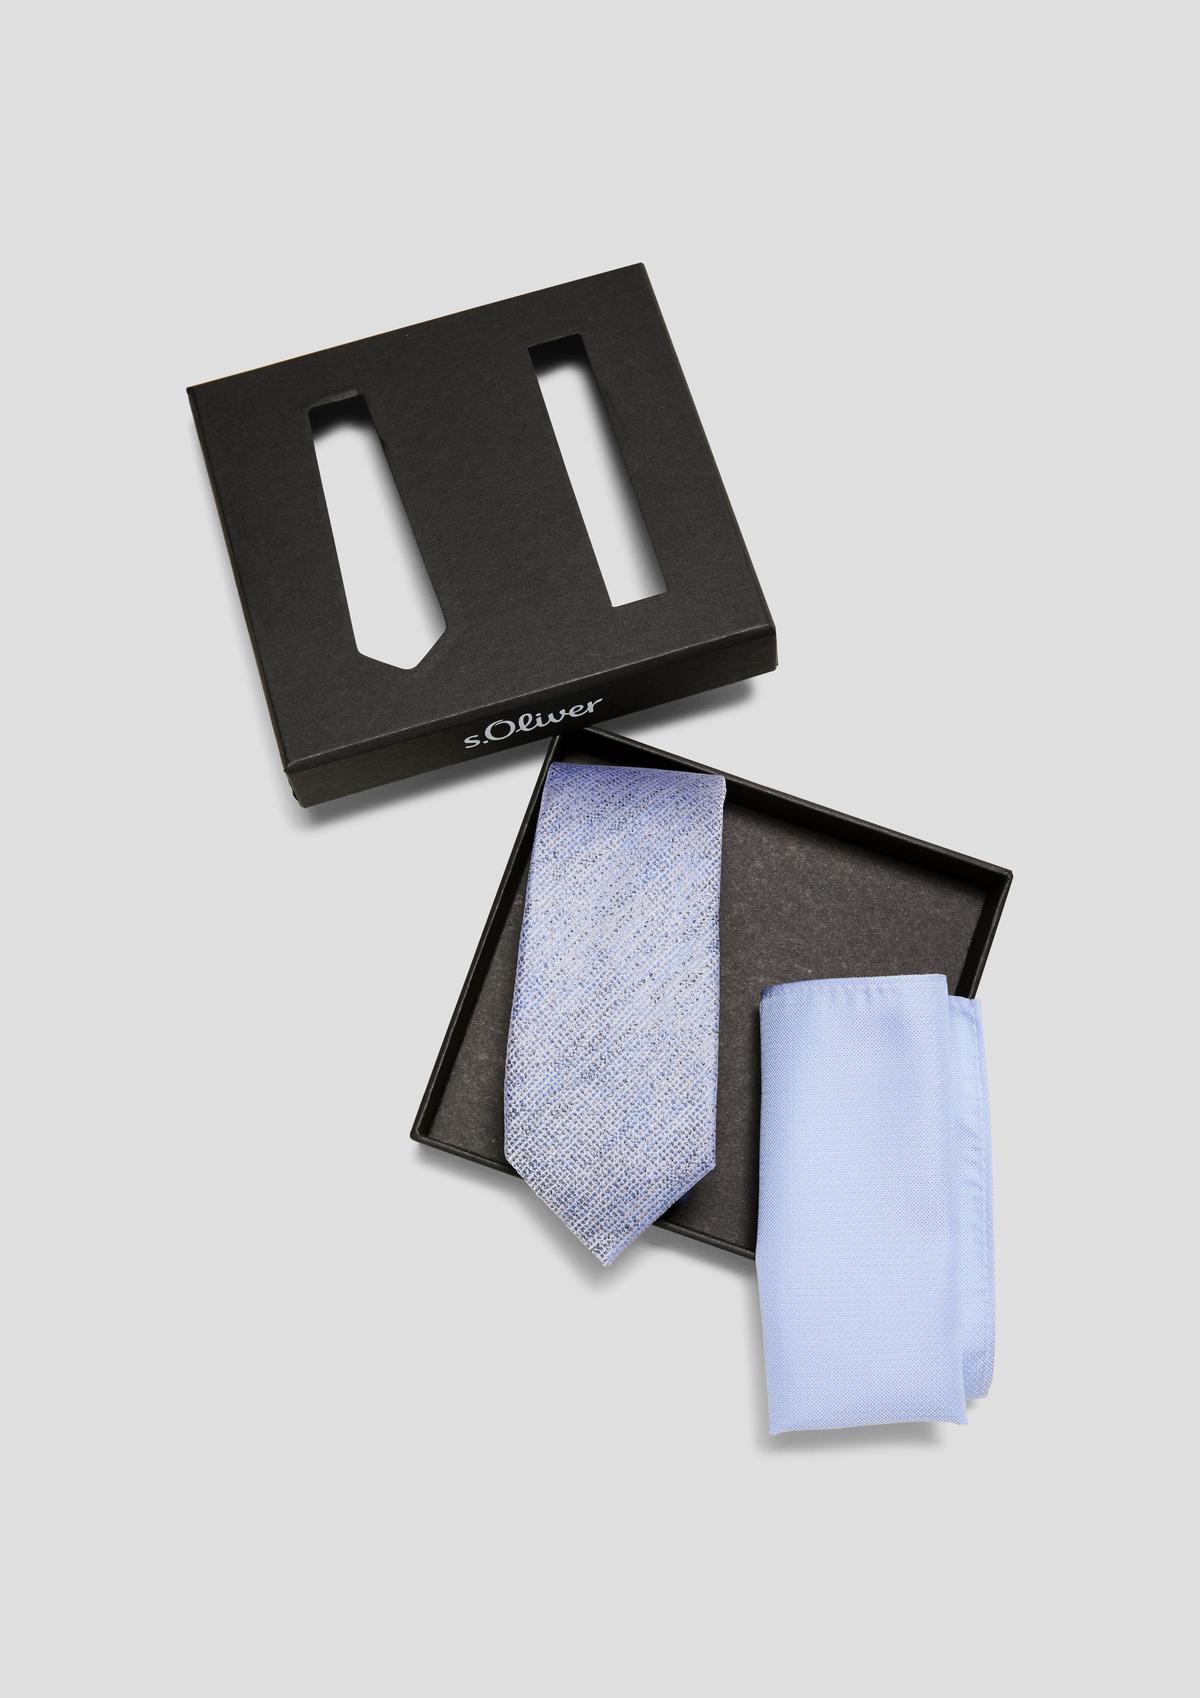 s.Oliver Accessories box with a tie and pocket square